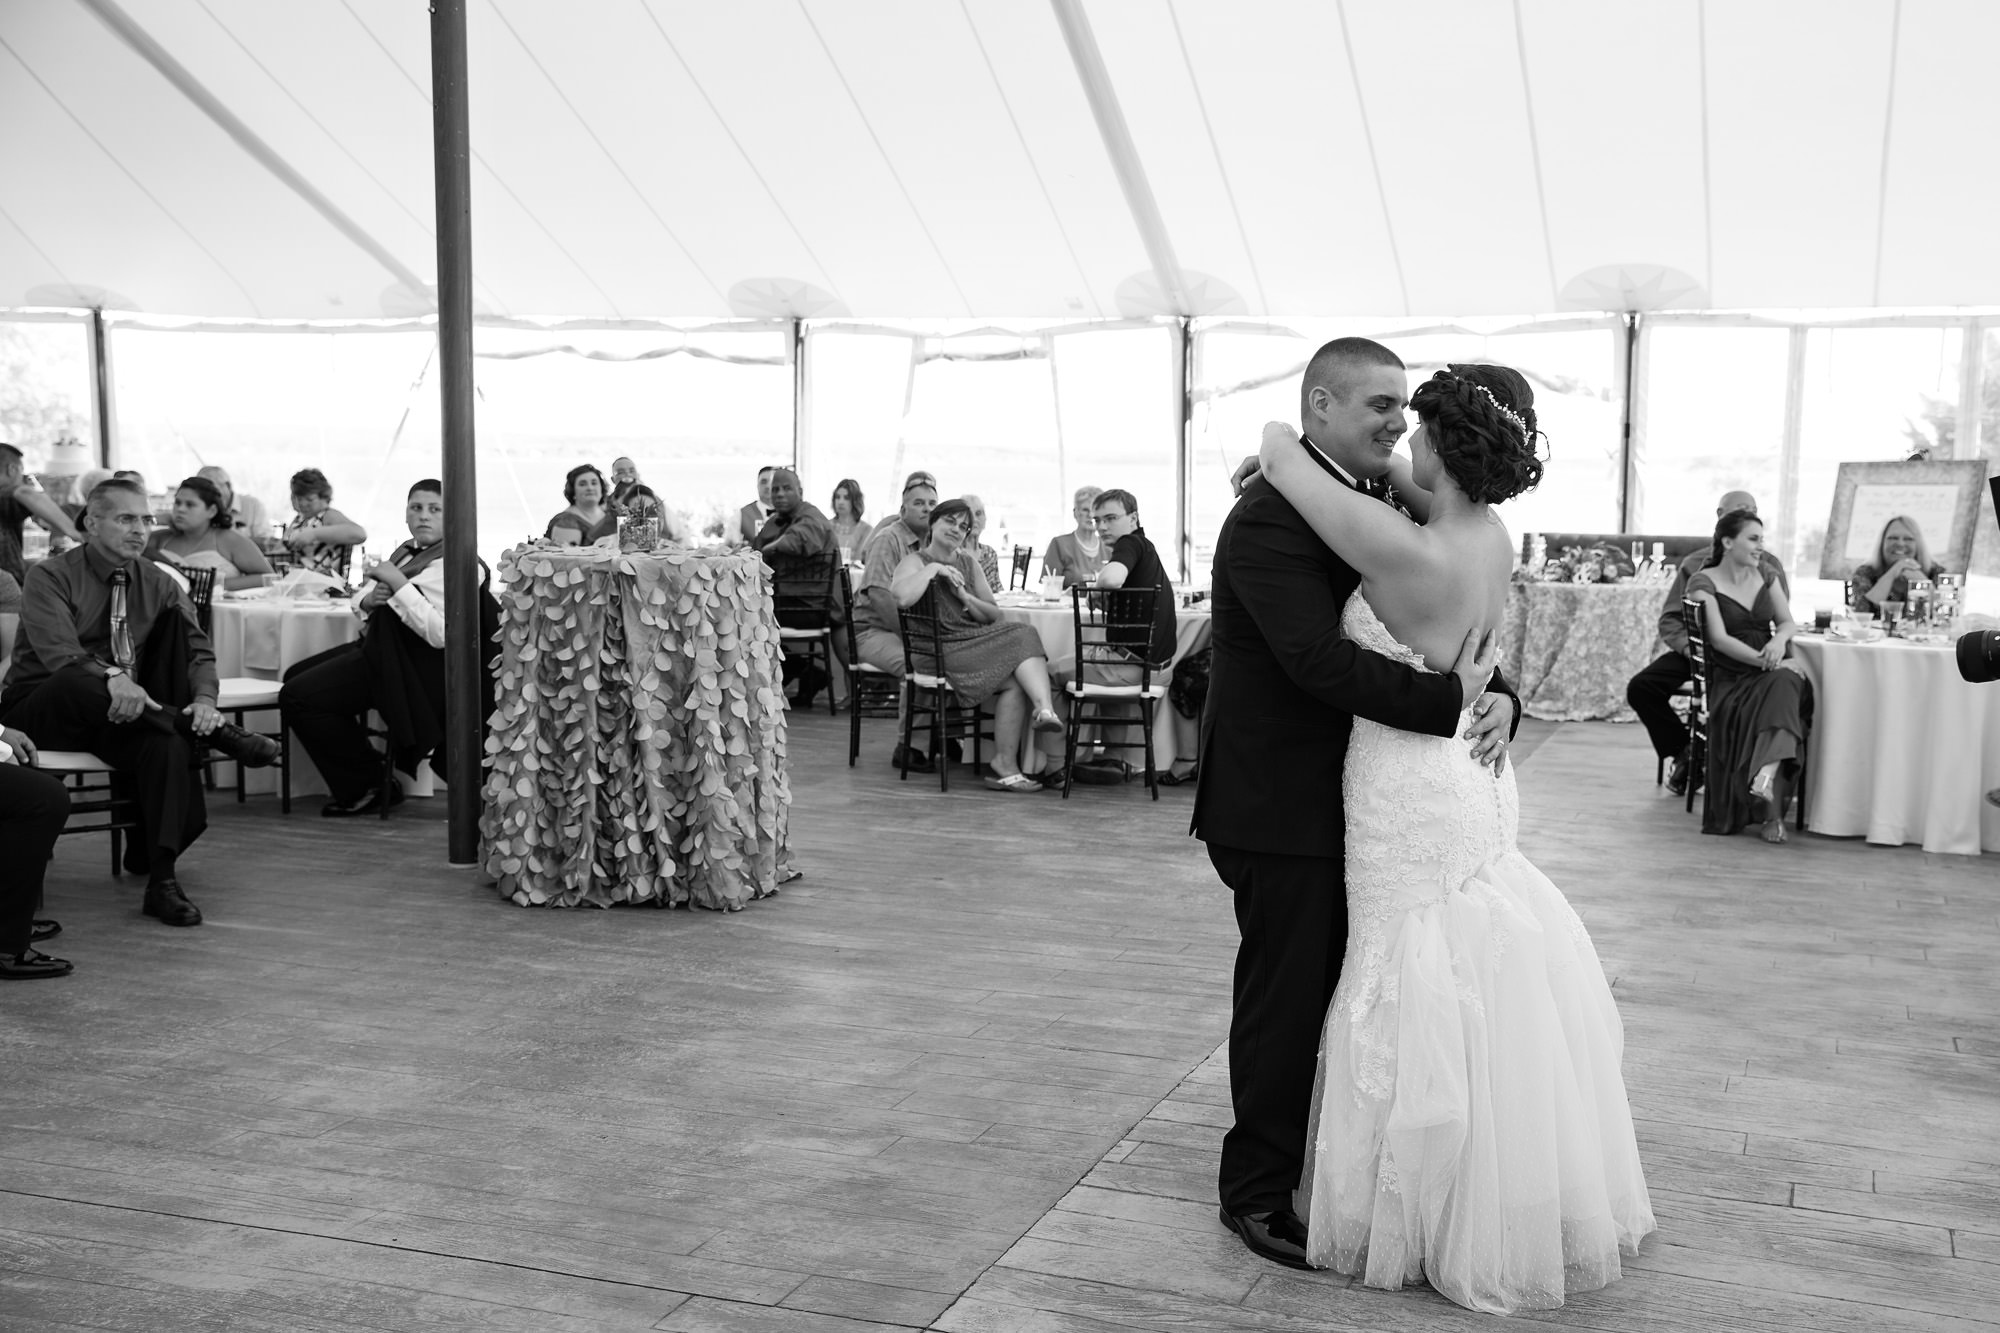 Kayla and Shawn's first dance on their wedding day at French's Point